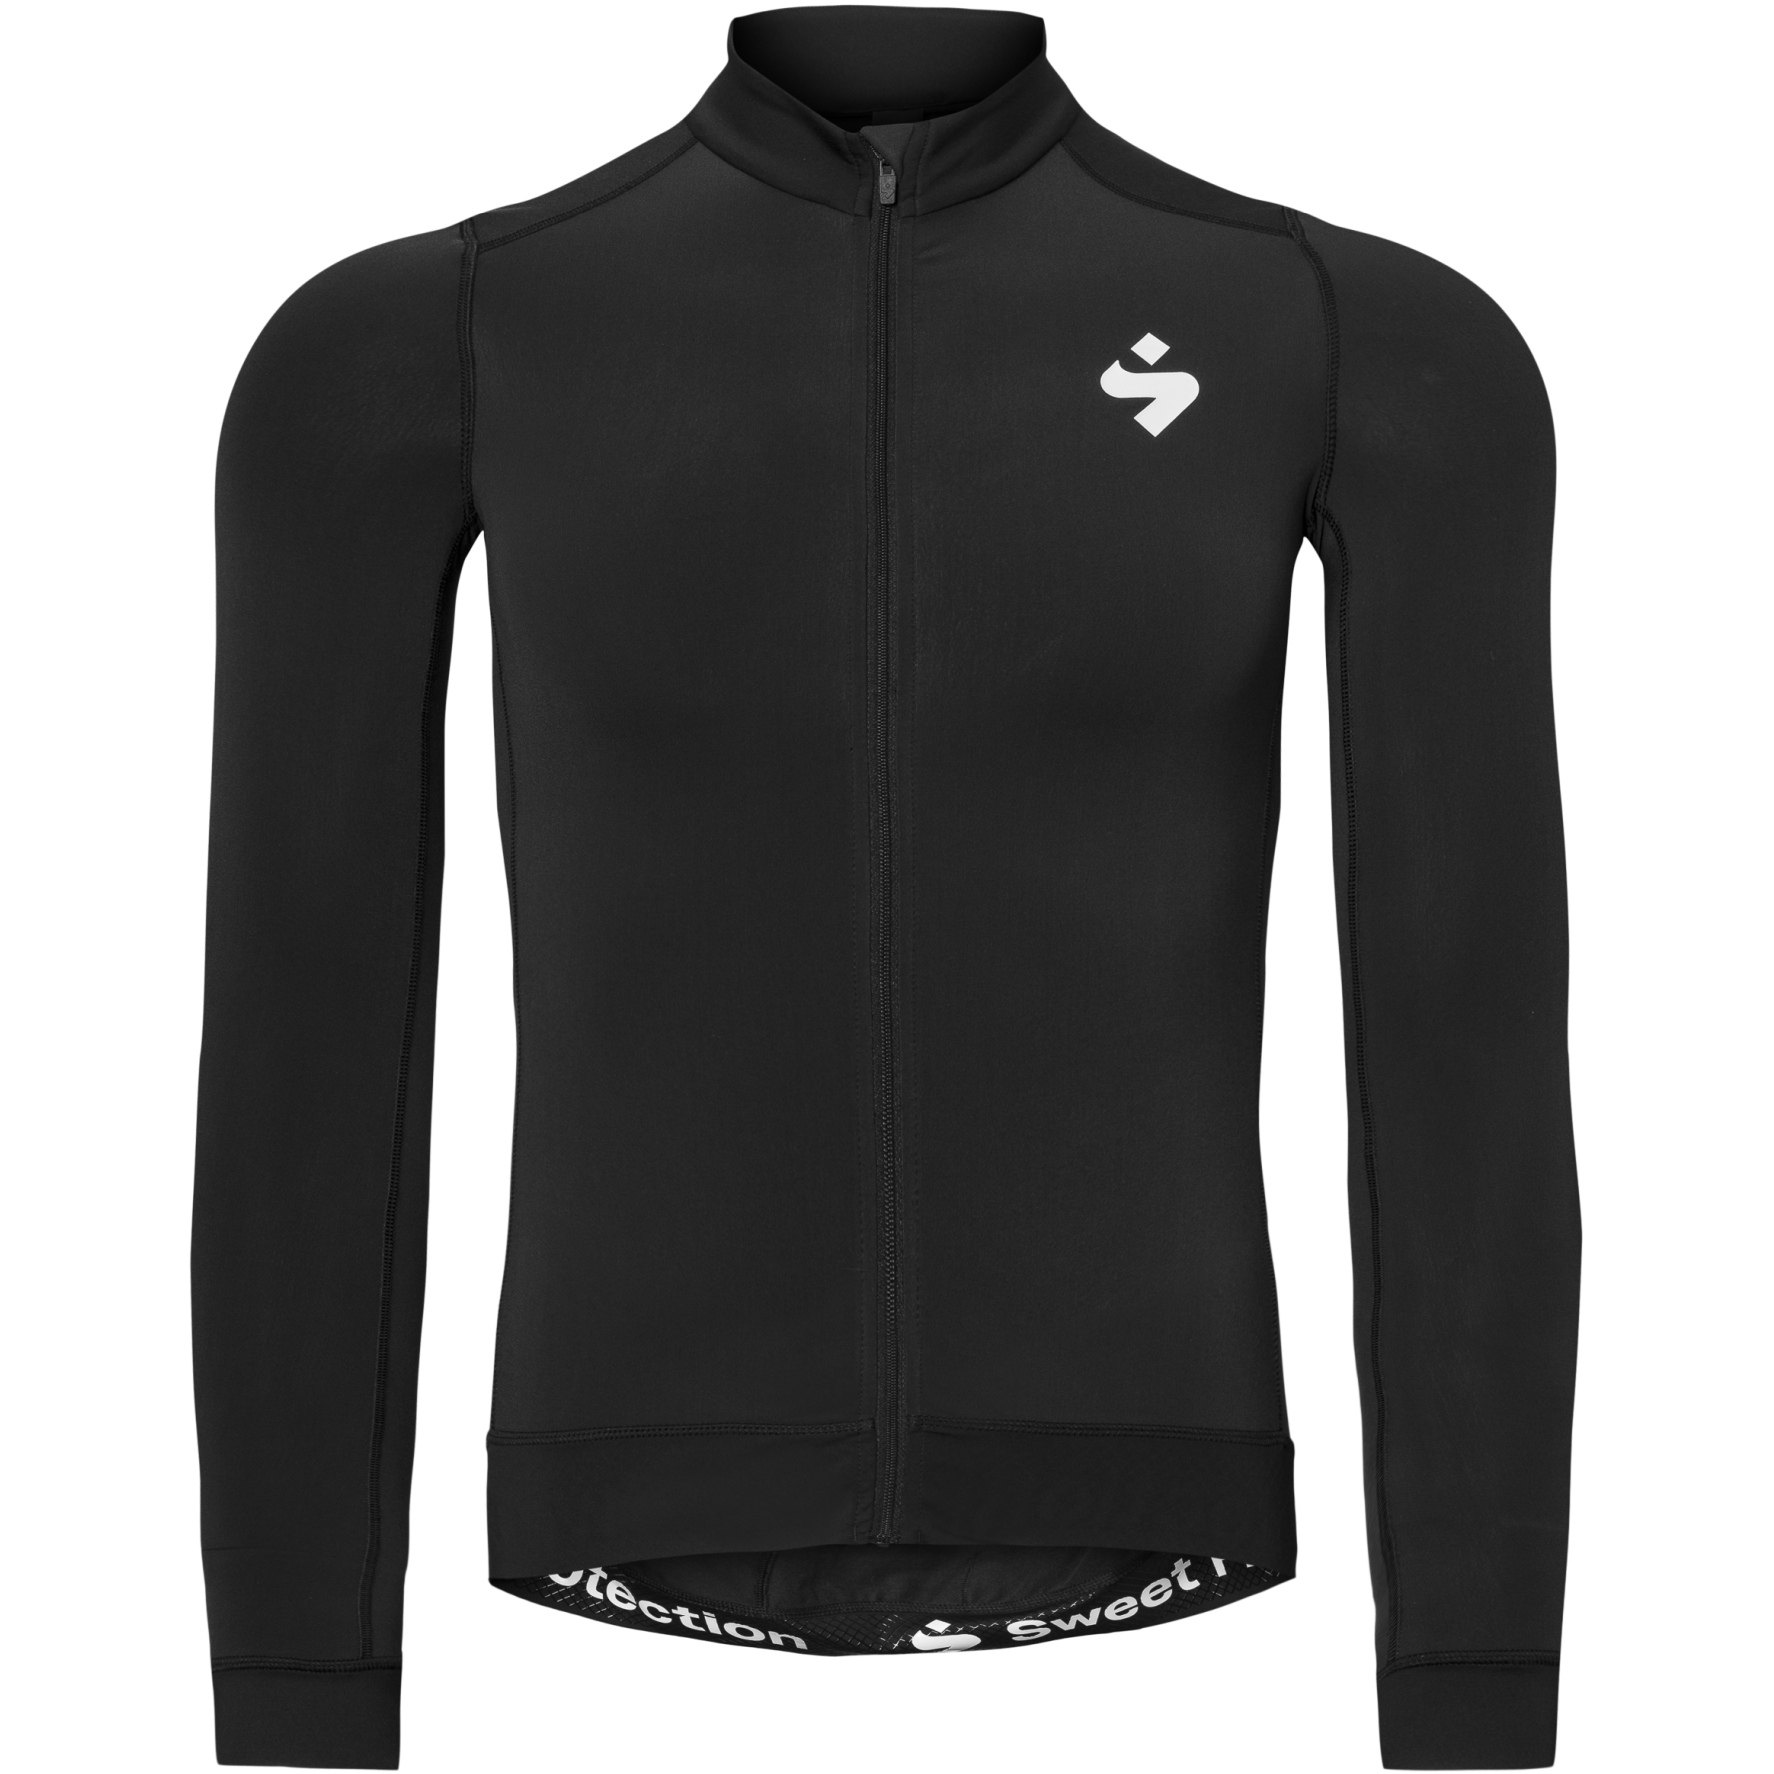 Foto de SWEET Protection Maillot Ciclismo Hombre - Crossfire Hybrid - Negro